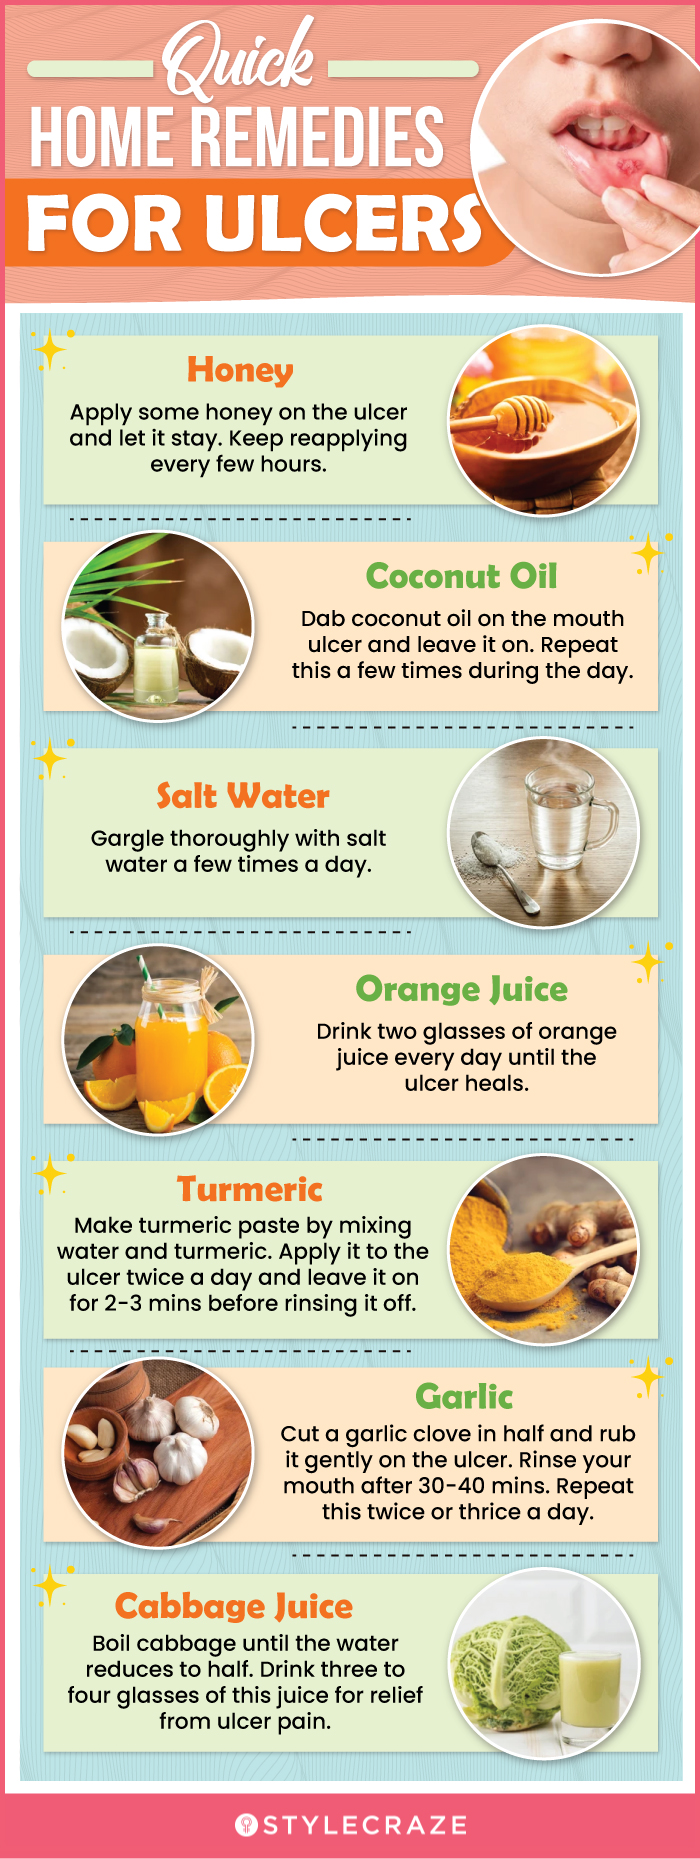 throat ulcer treatment at home tips and remedies